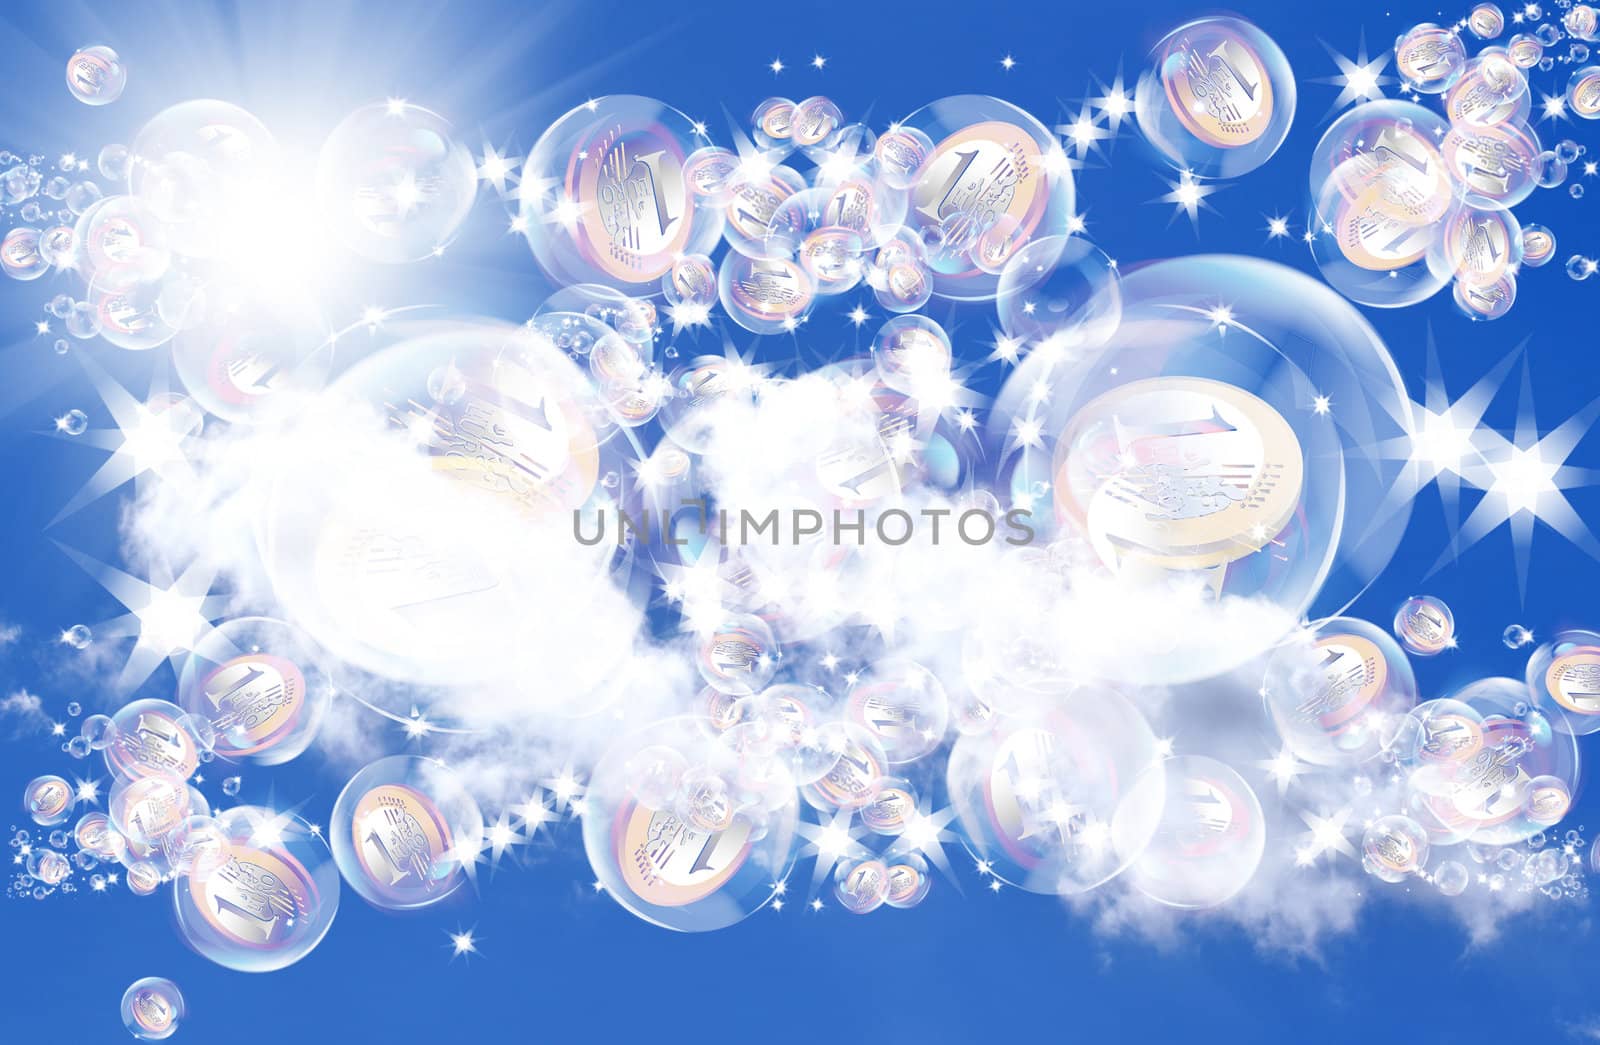 Pink dreams in soap bubbles  by sergey150770SV